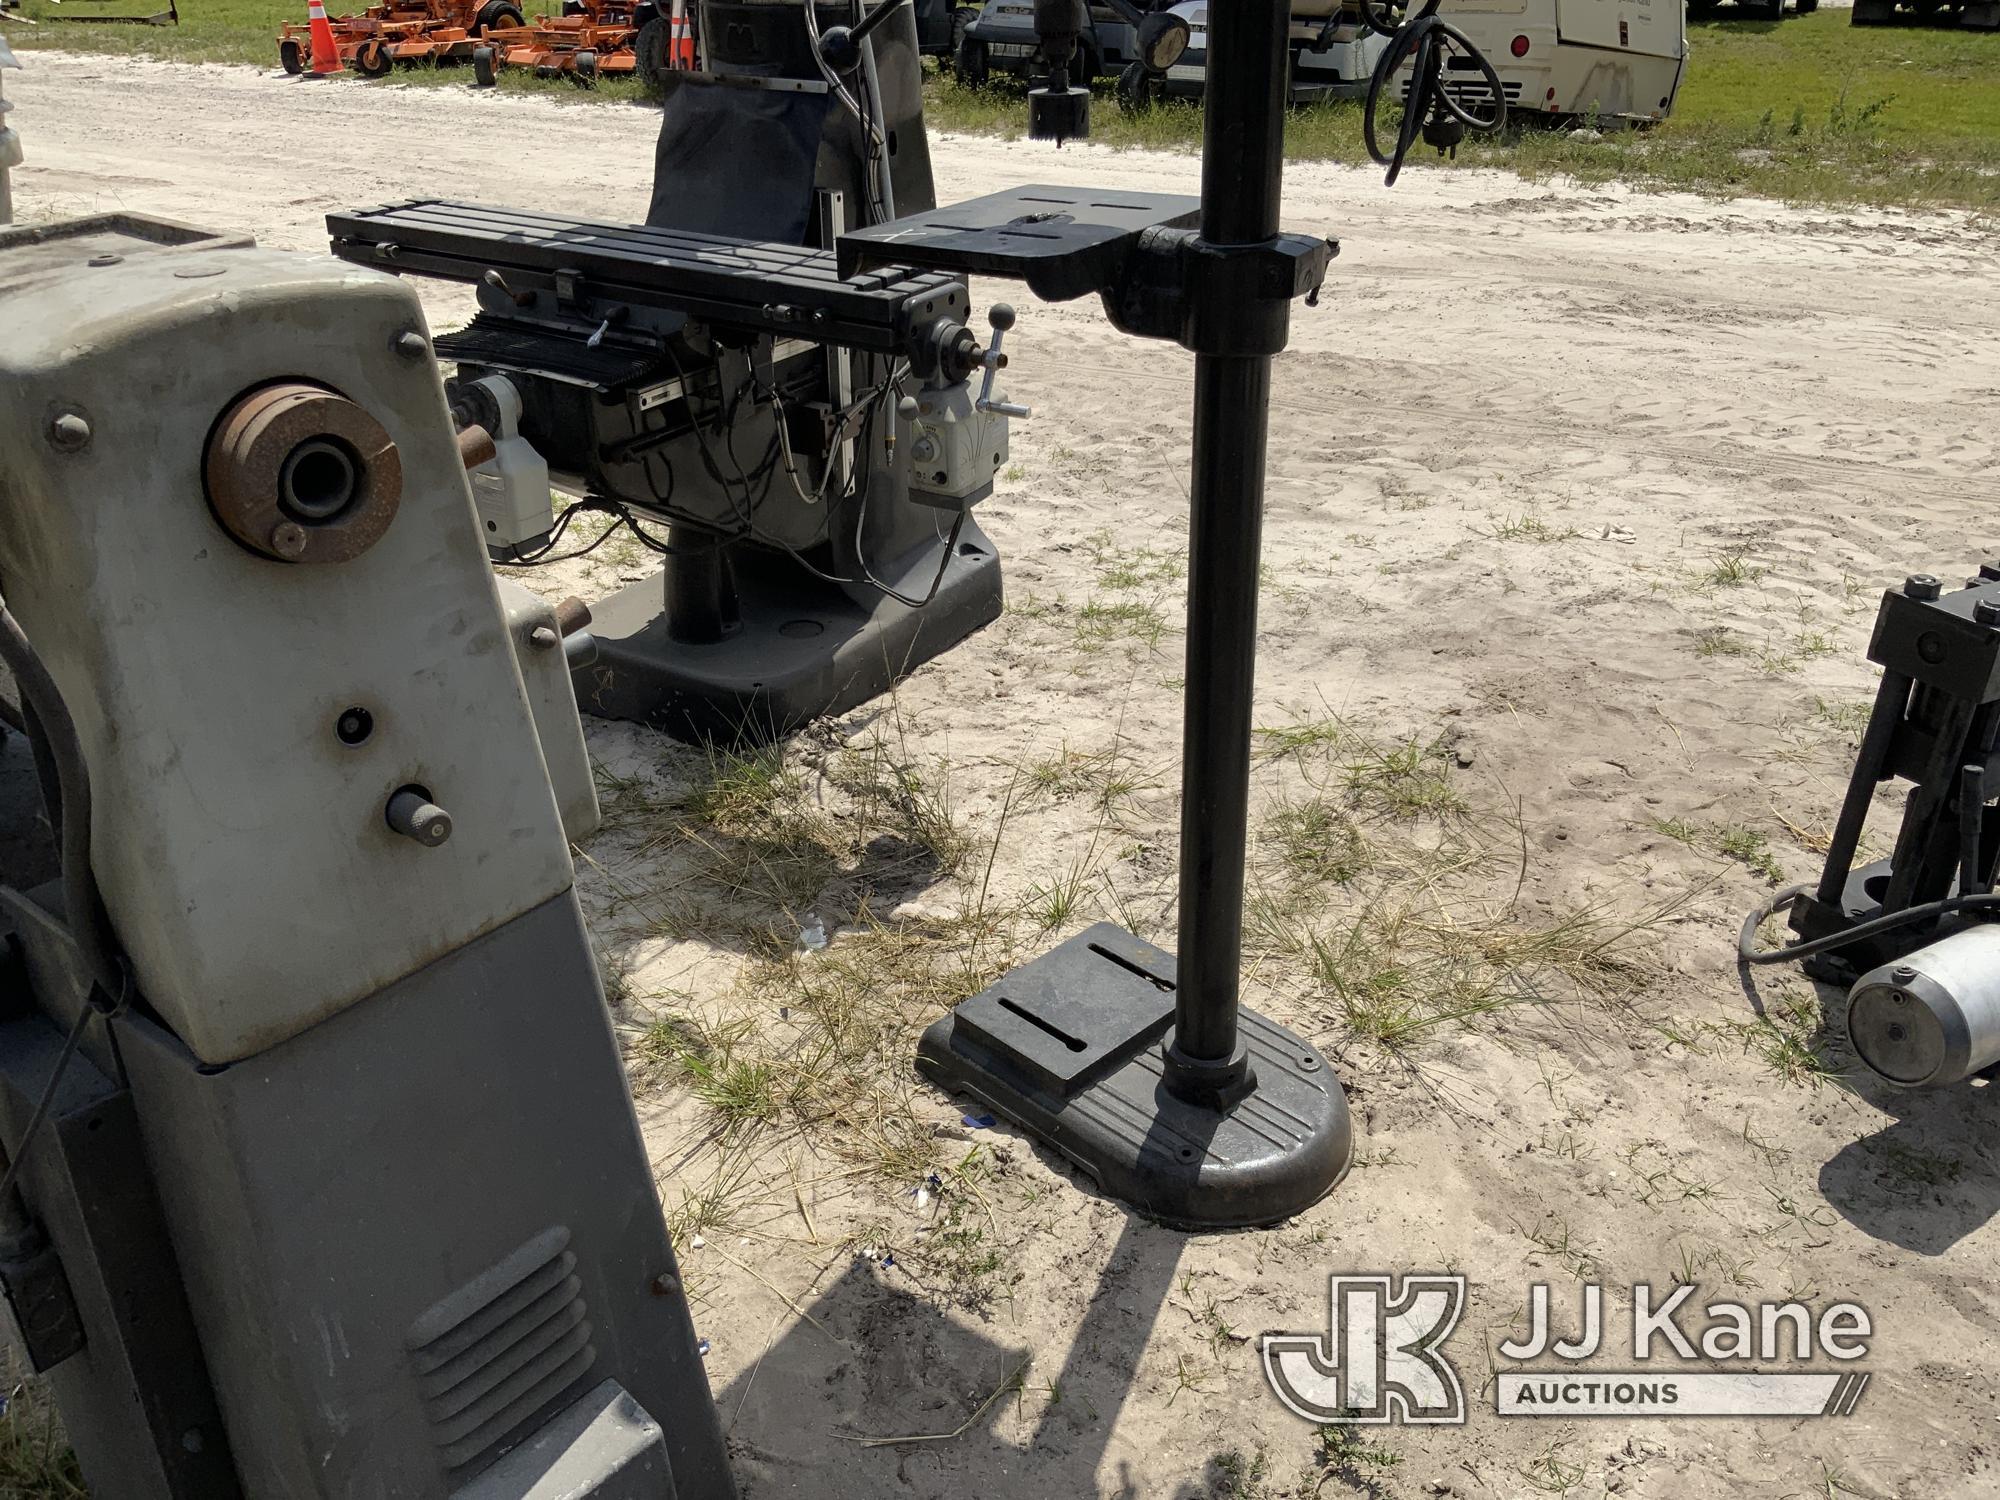 (Westlake, FL) Power Matic Drill Press (Condition Unknown) NOTE: This unit is being sold AS IS/WHERE